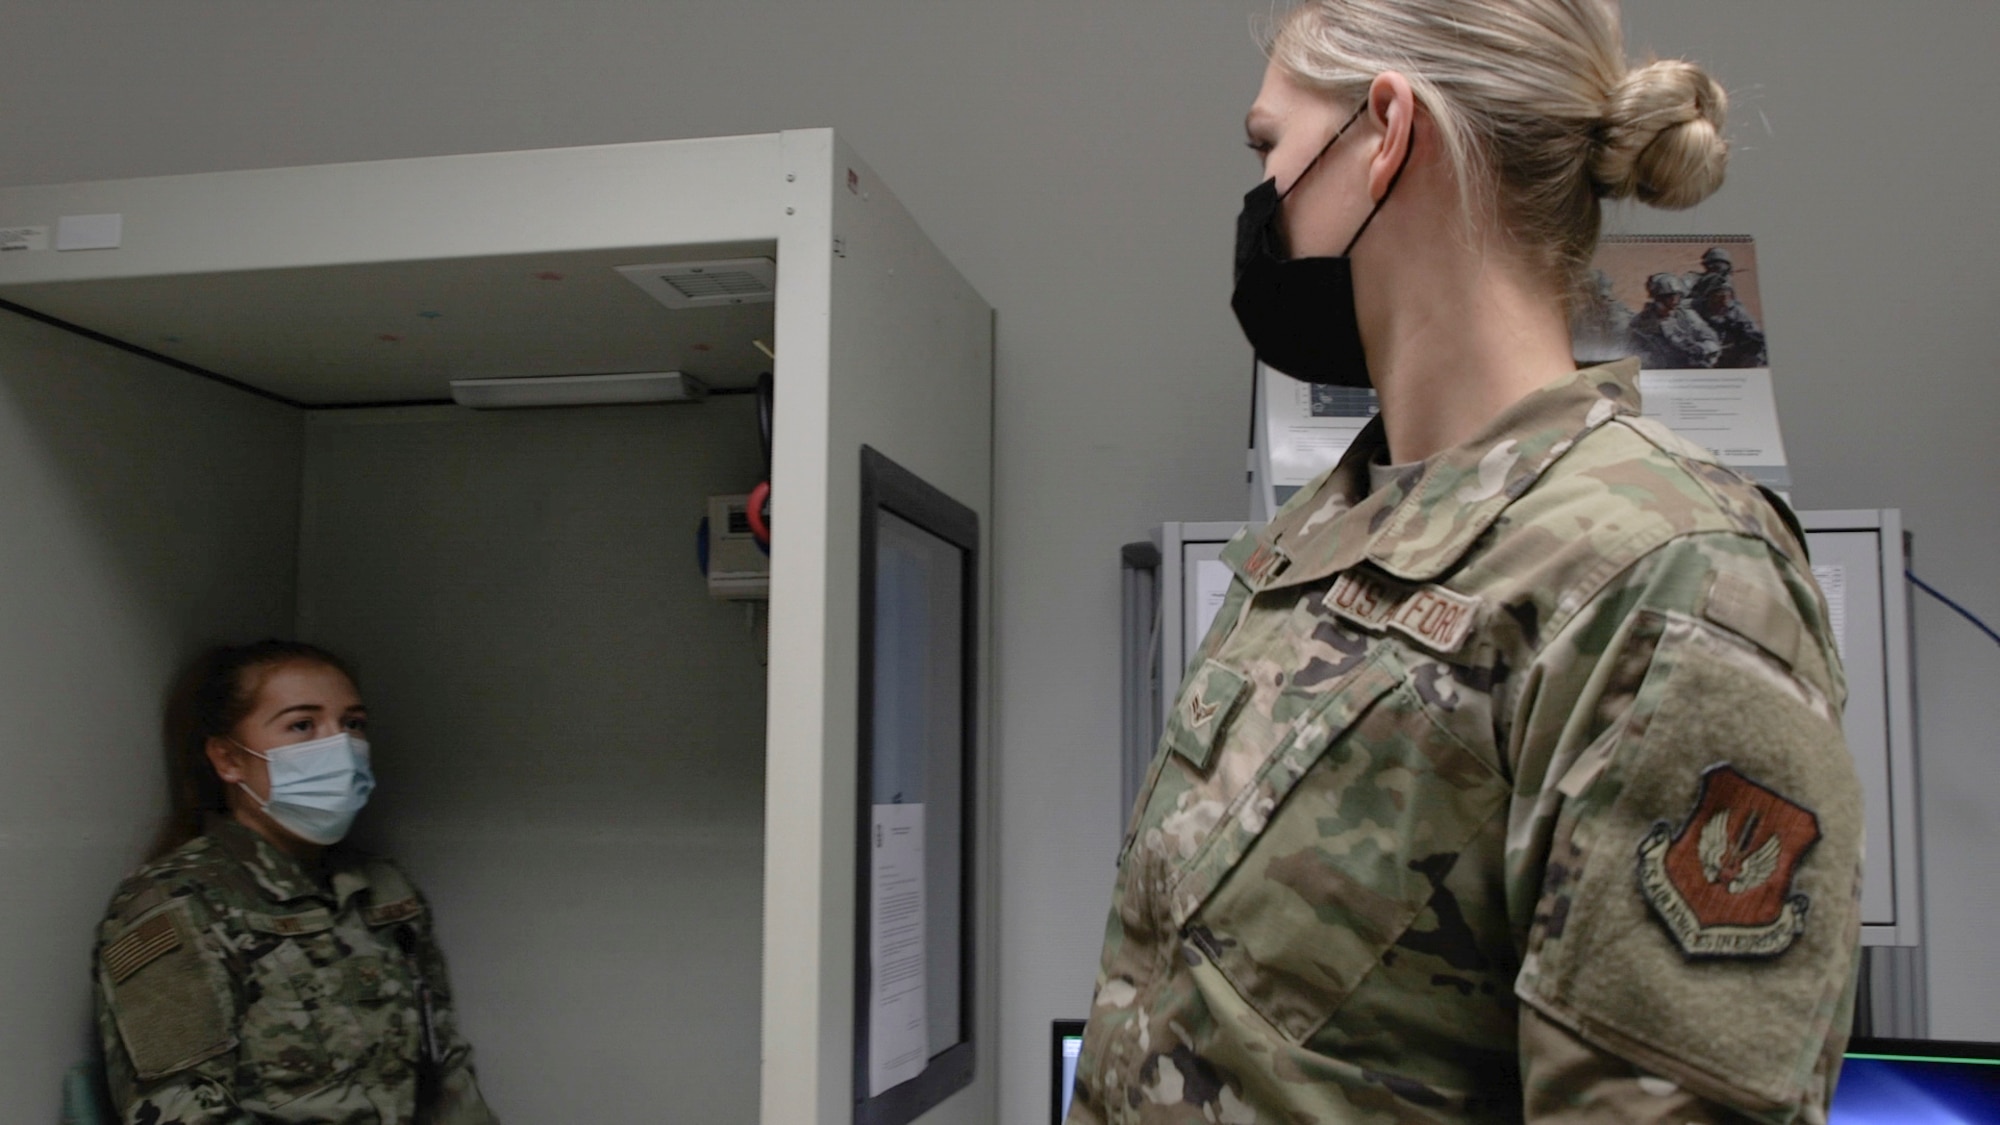 U.S. Air Force Airman 1st Class Bo Murray, 52nd Medical Group Public Health technician (right), prepares to give an audiogram test to  U.S. Air Force Senior Airman Alison Lewis, 52nd Medical Group Public Health technician, at Spangdahlem Air Base, Germany, March 29, 2021. As part of the Force Health Management section, the technicians are responsible for programs that deal with deployments, TDYs, occupational environmental health, as well as travel medicine. (U.S. Air Force photo by Tech. Sgt. Warren D. Spearman Jr.)